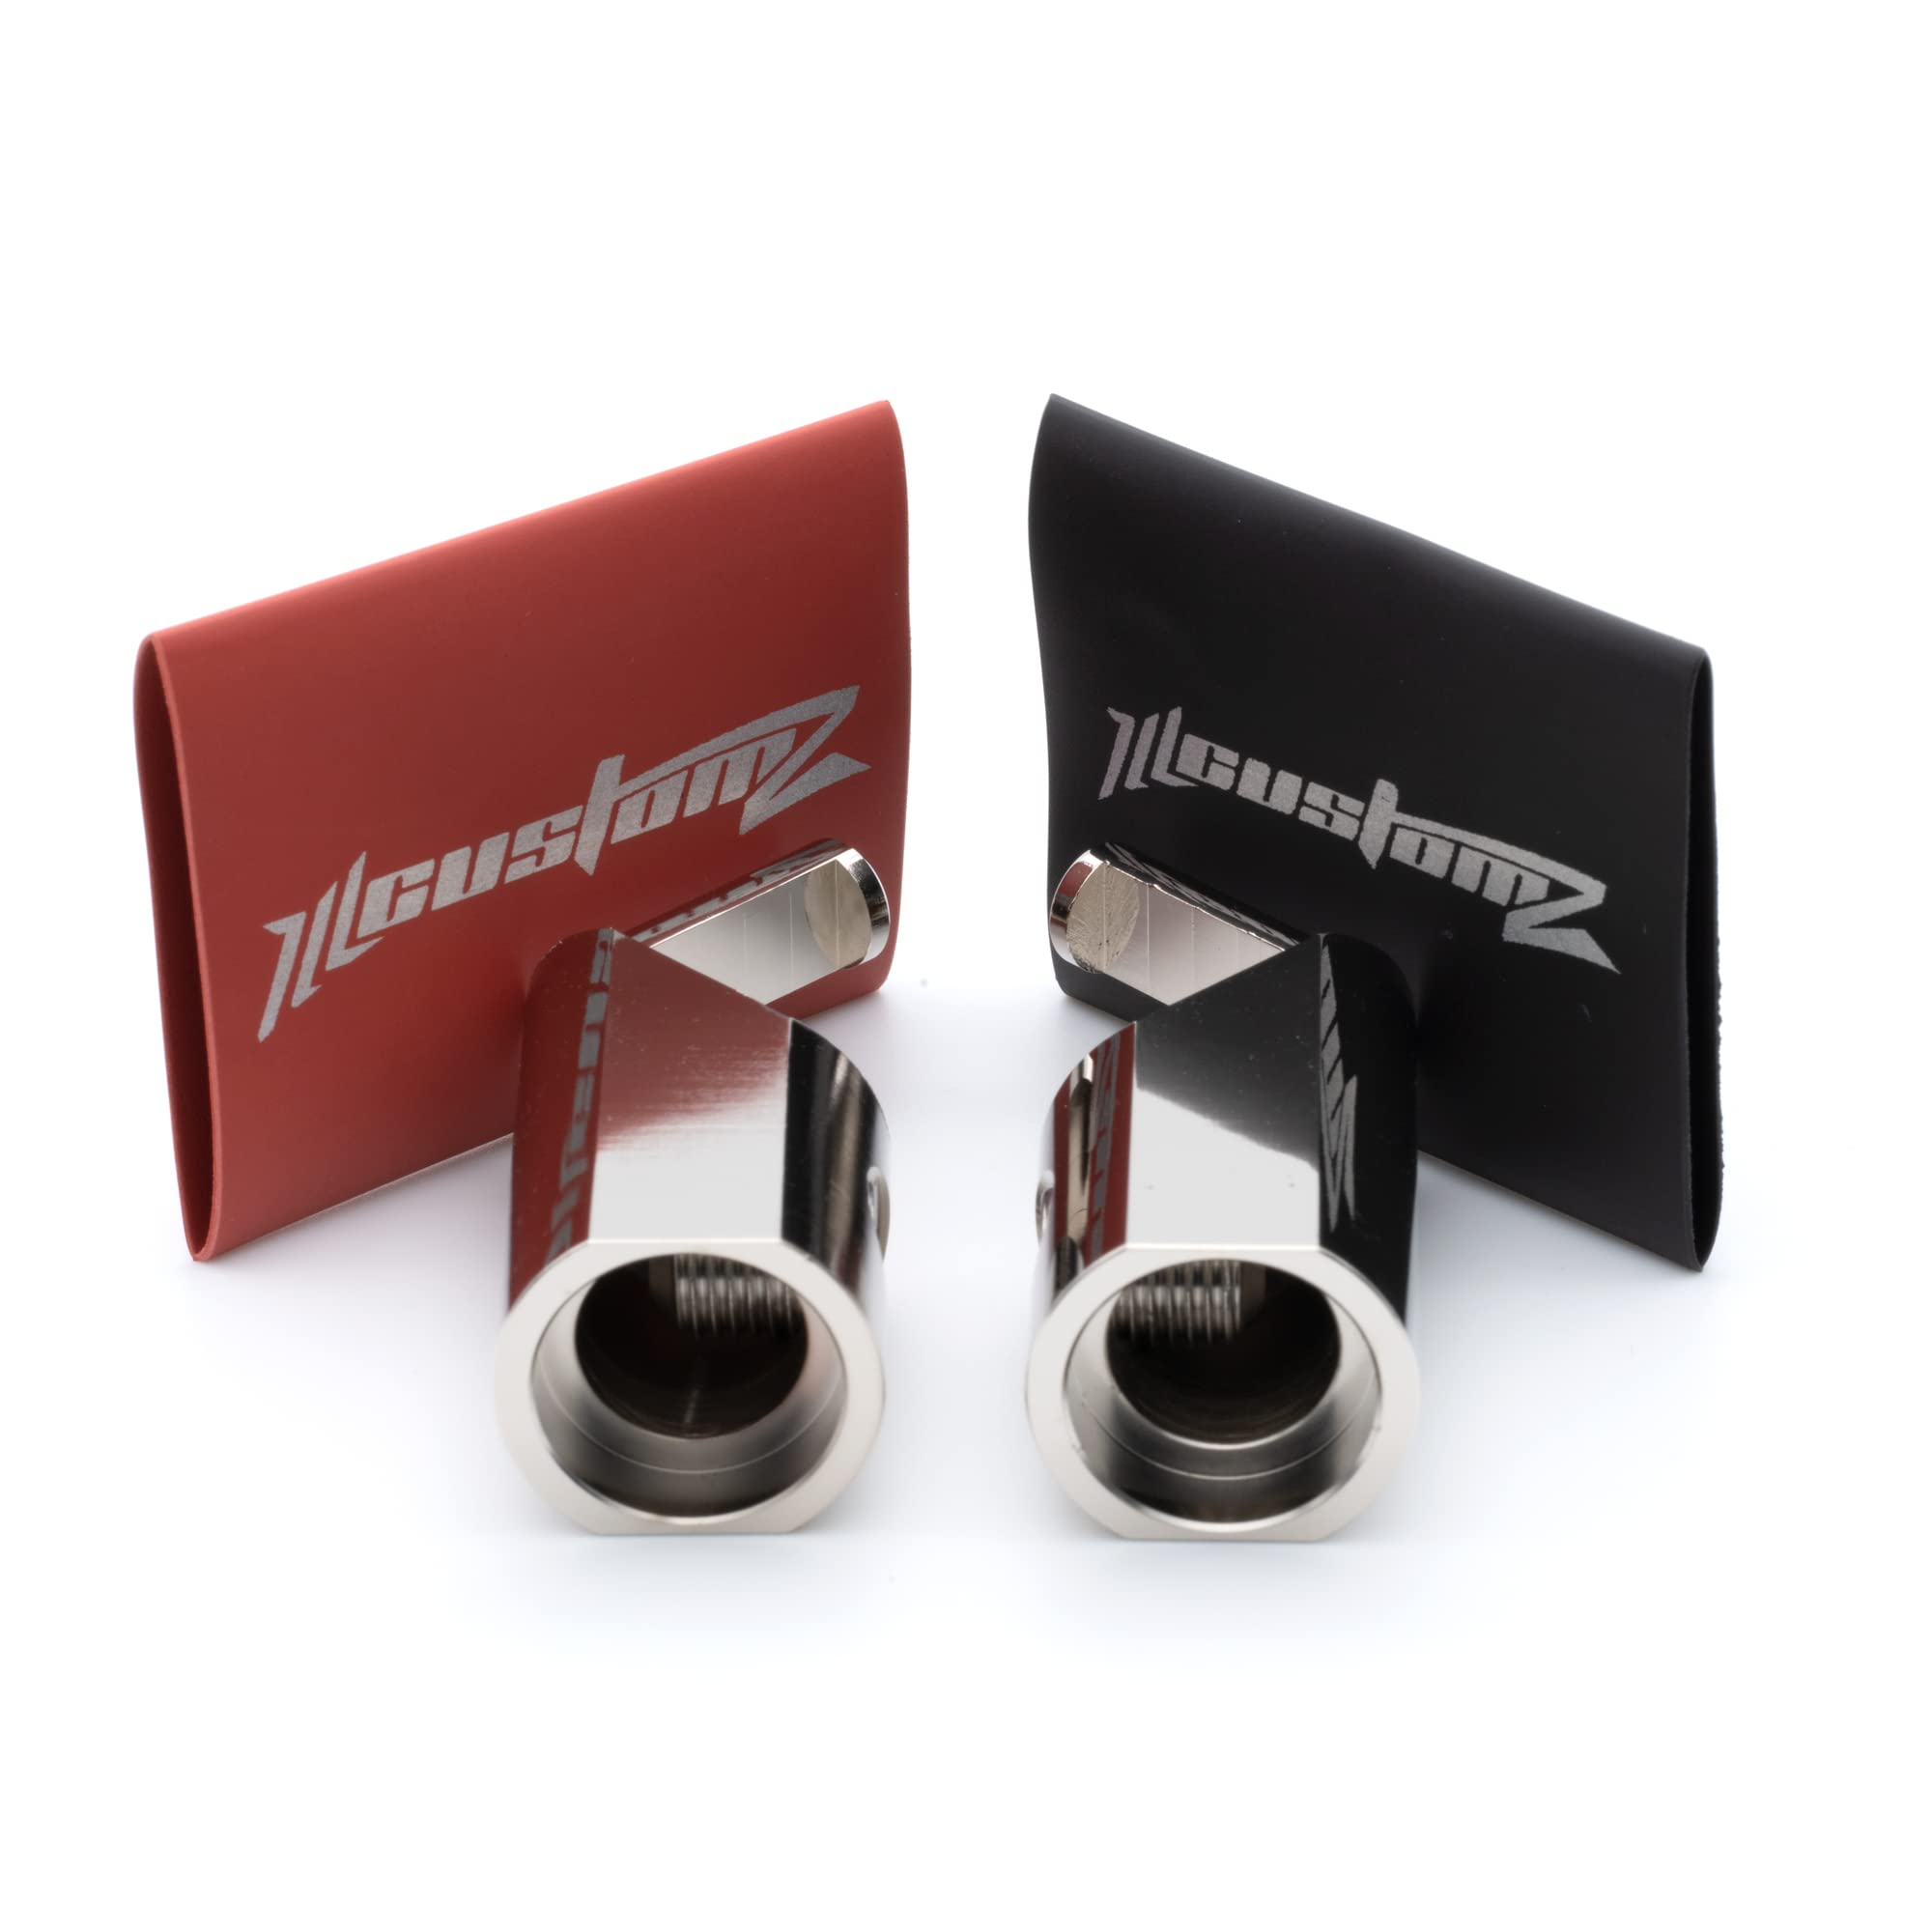 Ill Customz 1/0 AWG to 4 Gauge 45 Degree Angled Offset Amp Input Reducers Pair